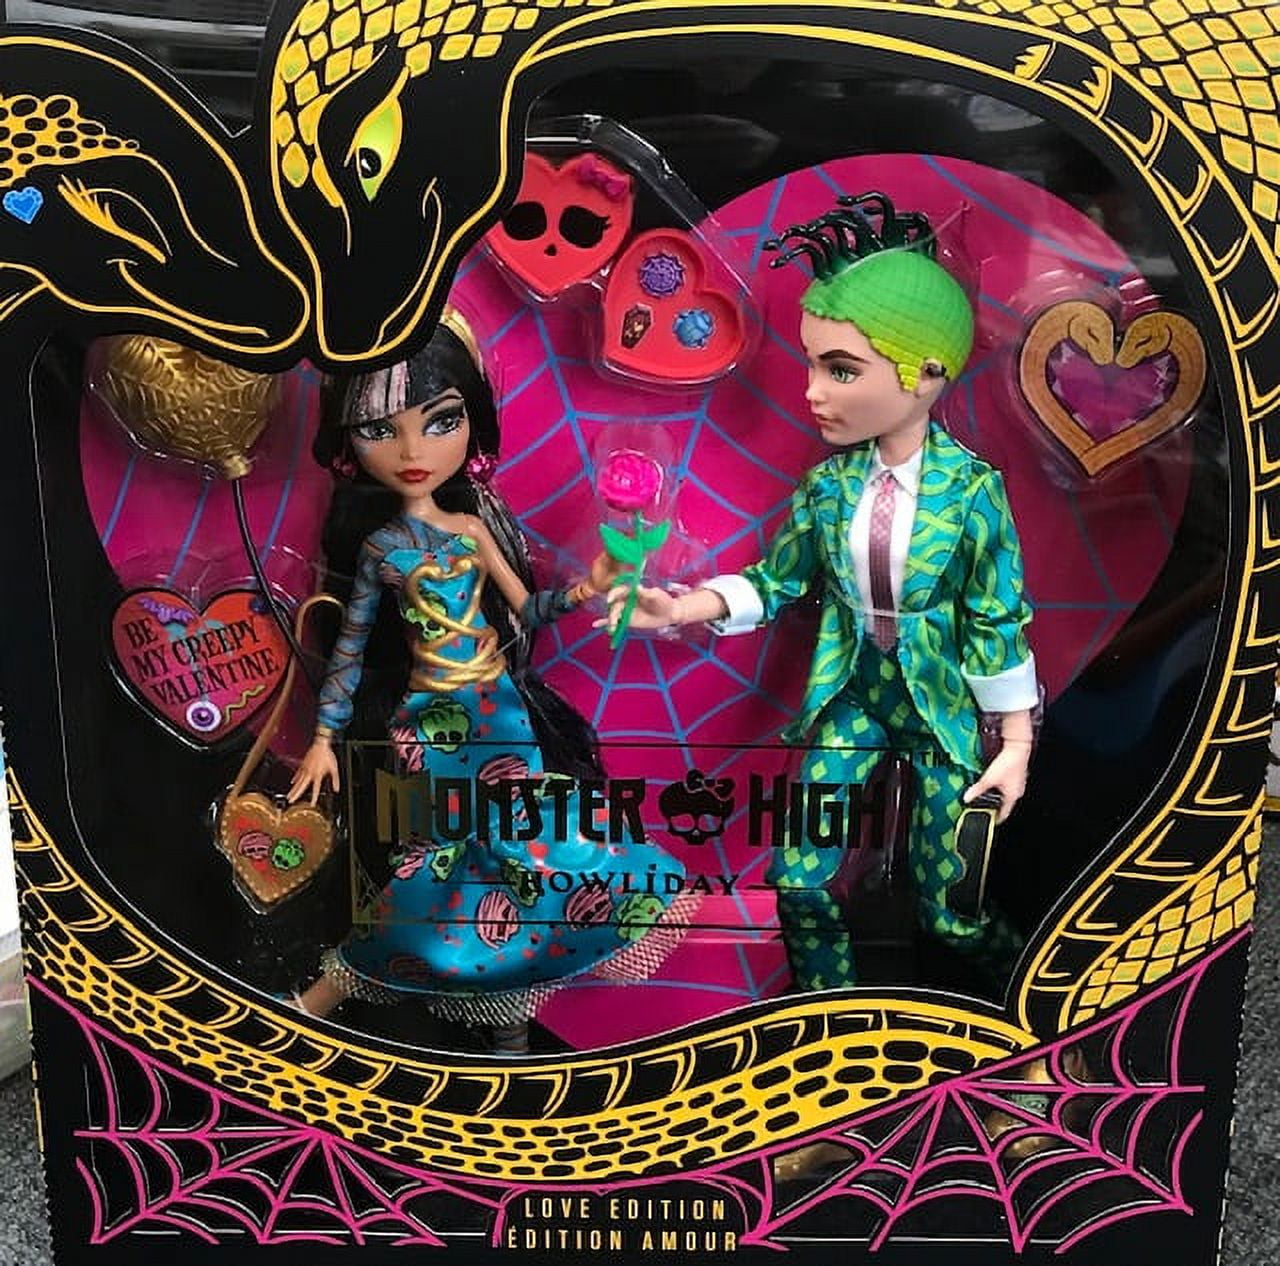 Monster High Howliday Love Edition Cleo and Deuce Set Is Fantastic!